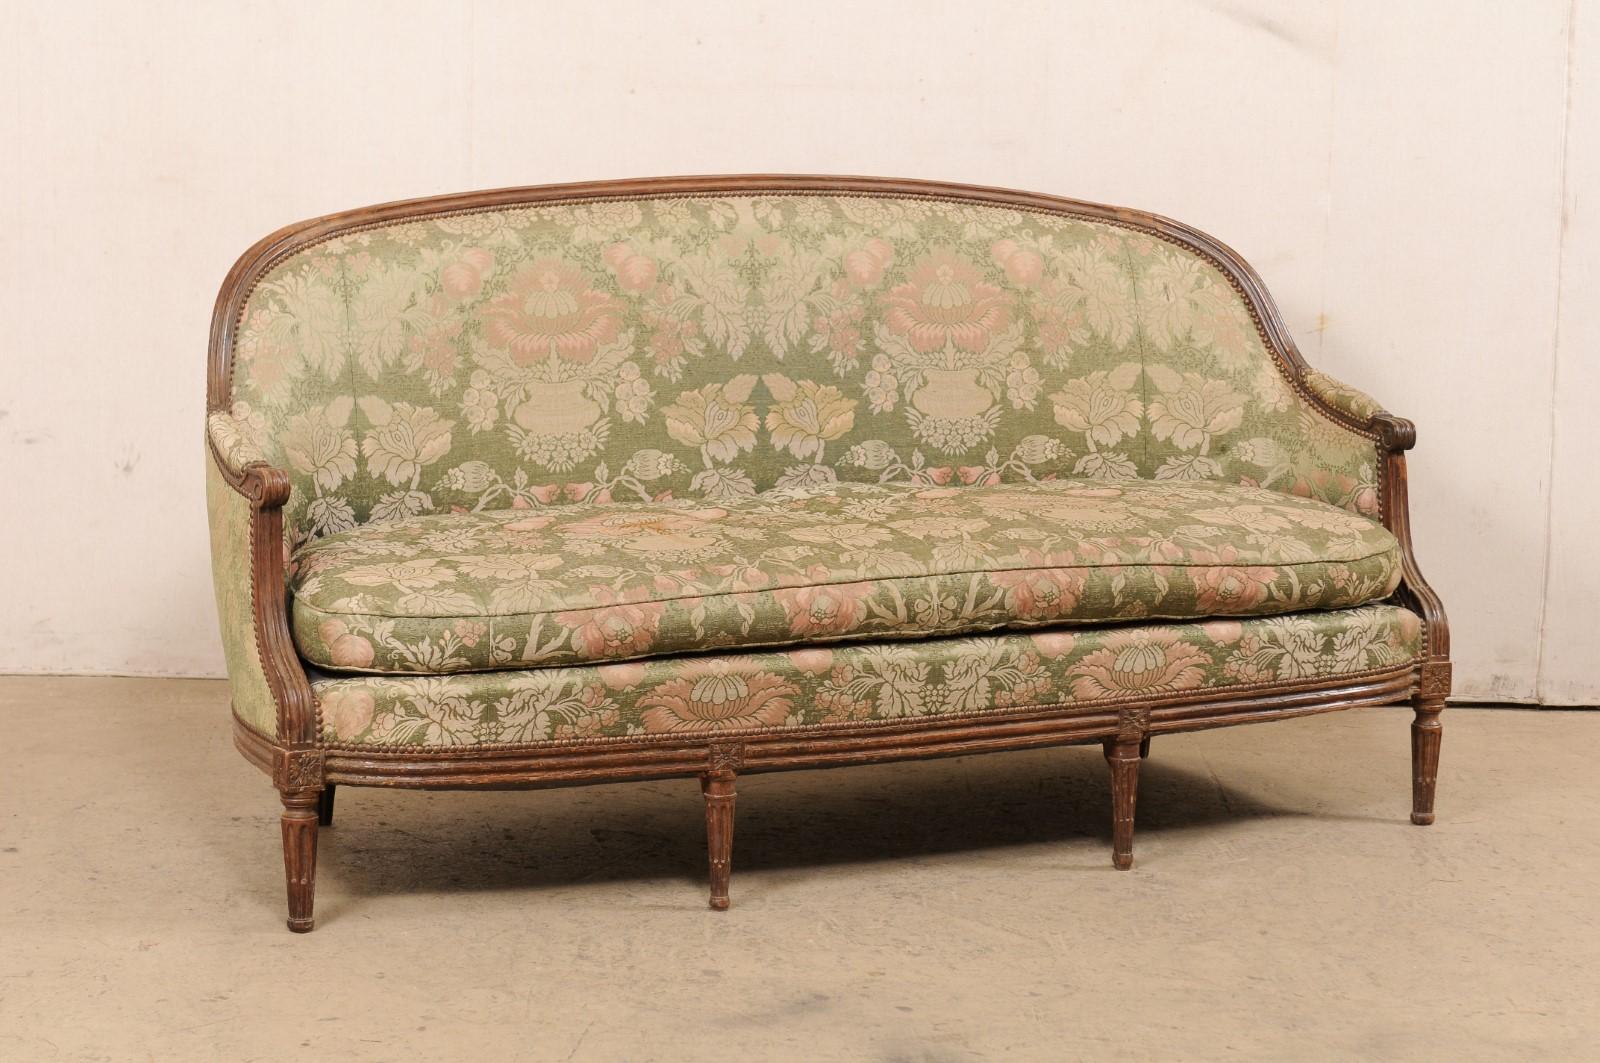 A Swedish period Gustavian upholstered and carved-wood sofa from the early 19th century. This antique tub style sofa from Sweden features an elegantly arched wooden top rail, with sides sloping down to become arms (fitted with manchette pad rests),